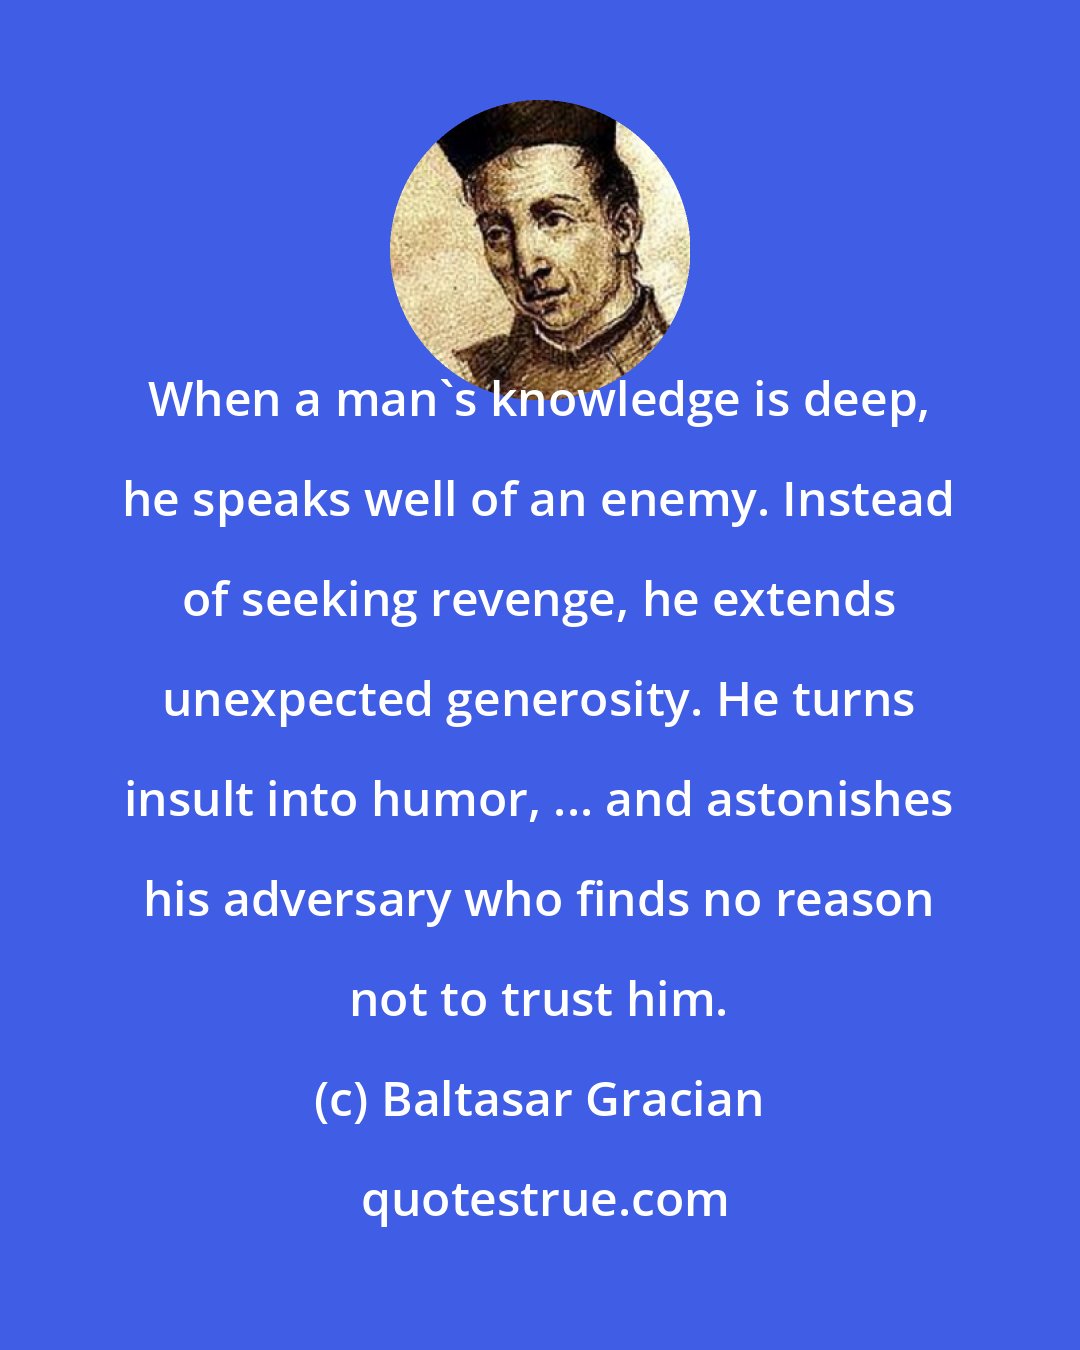 Baltasar Gracian: When a man's knowledge is deep, he speaks well of an enemy. Instead of seeking revenge, he extends unexpected generosity. He turns insult into humor, ... and astonishes his adversary who finds no reason not to trust him.